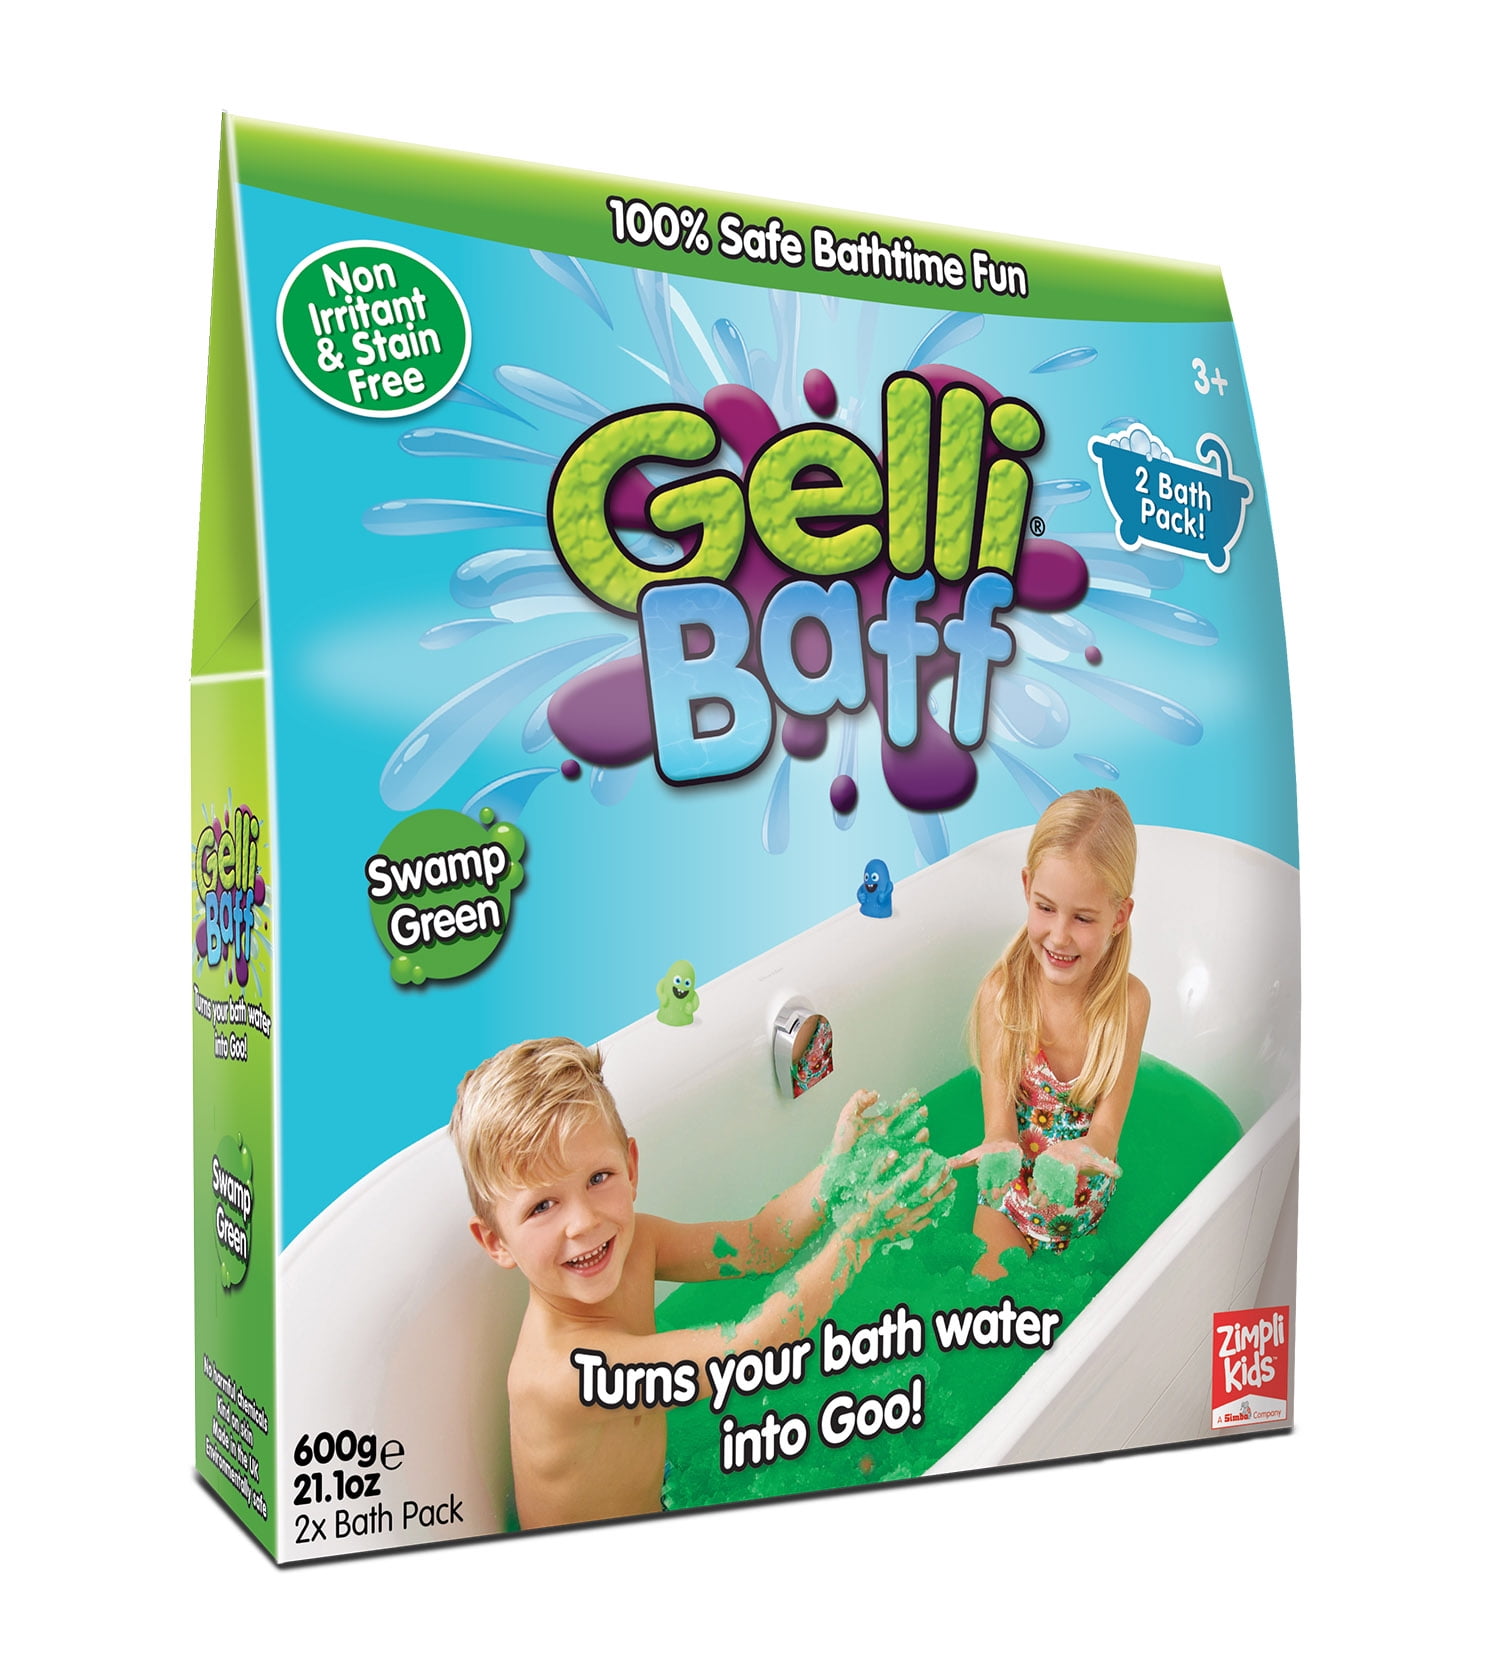 Slime Play Zimpli Kids Bath Sink Fun Make Your Own Just Add Water Makes 4 litres